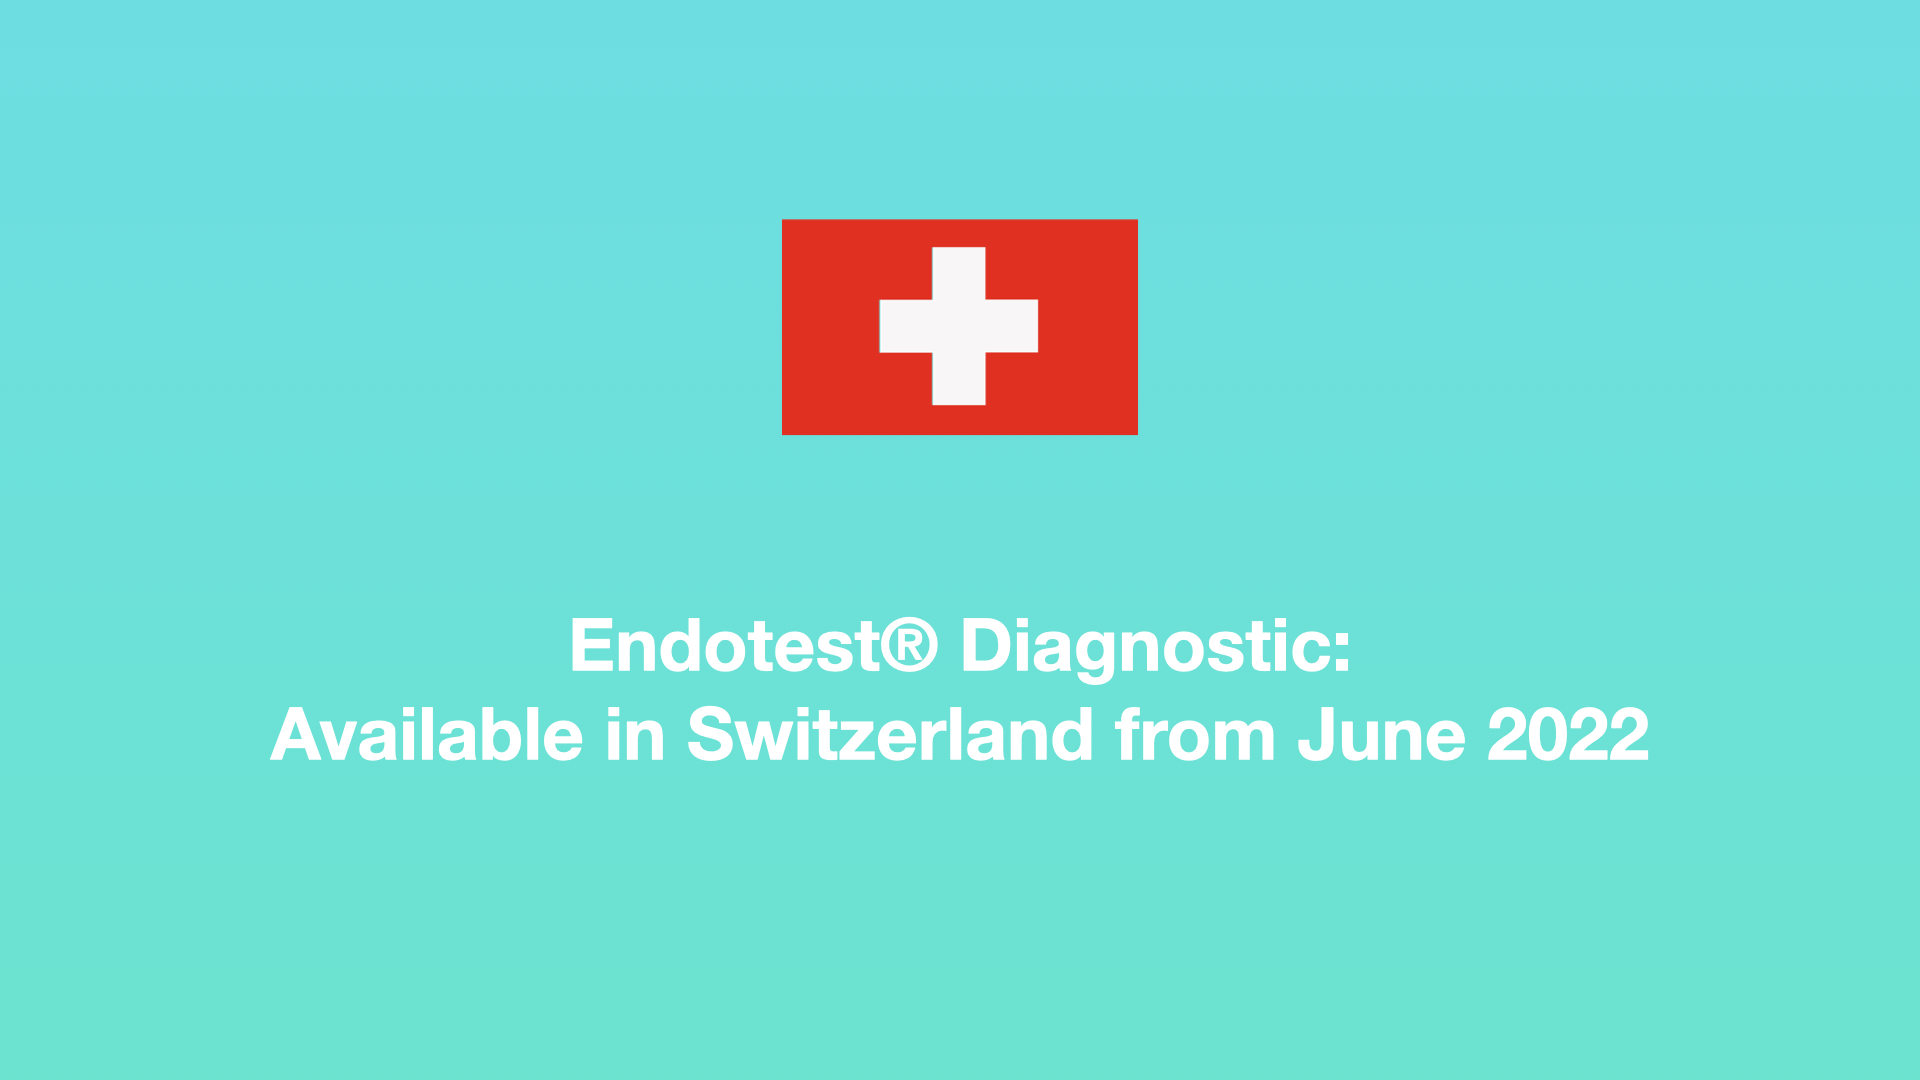 Endotest® Diagnostic will be available in Switzerland as from 1 June 2022